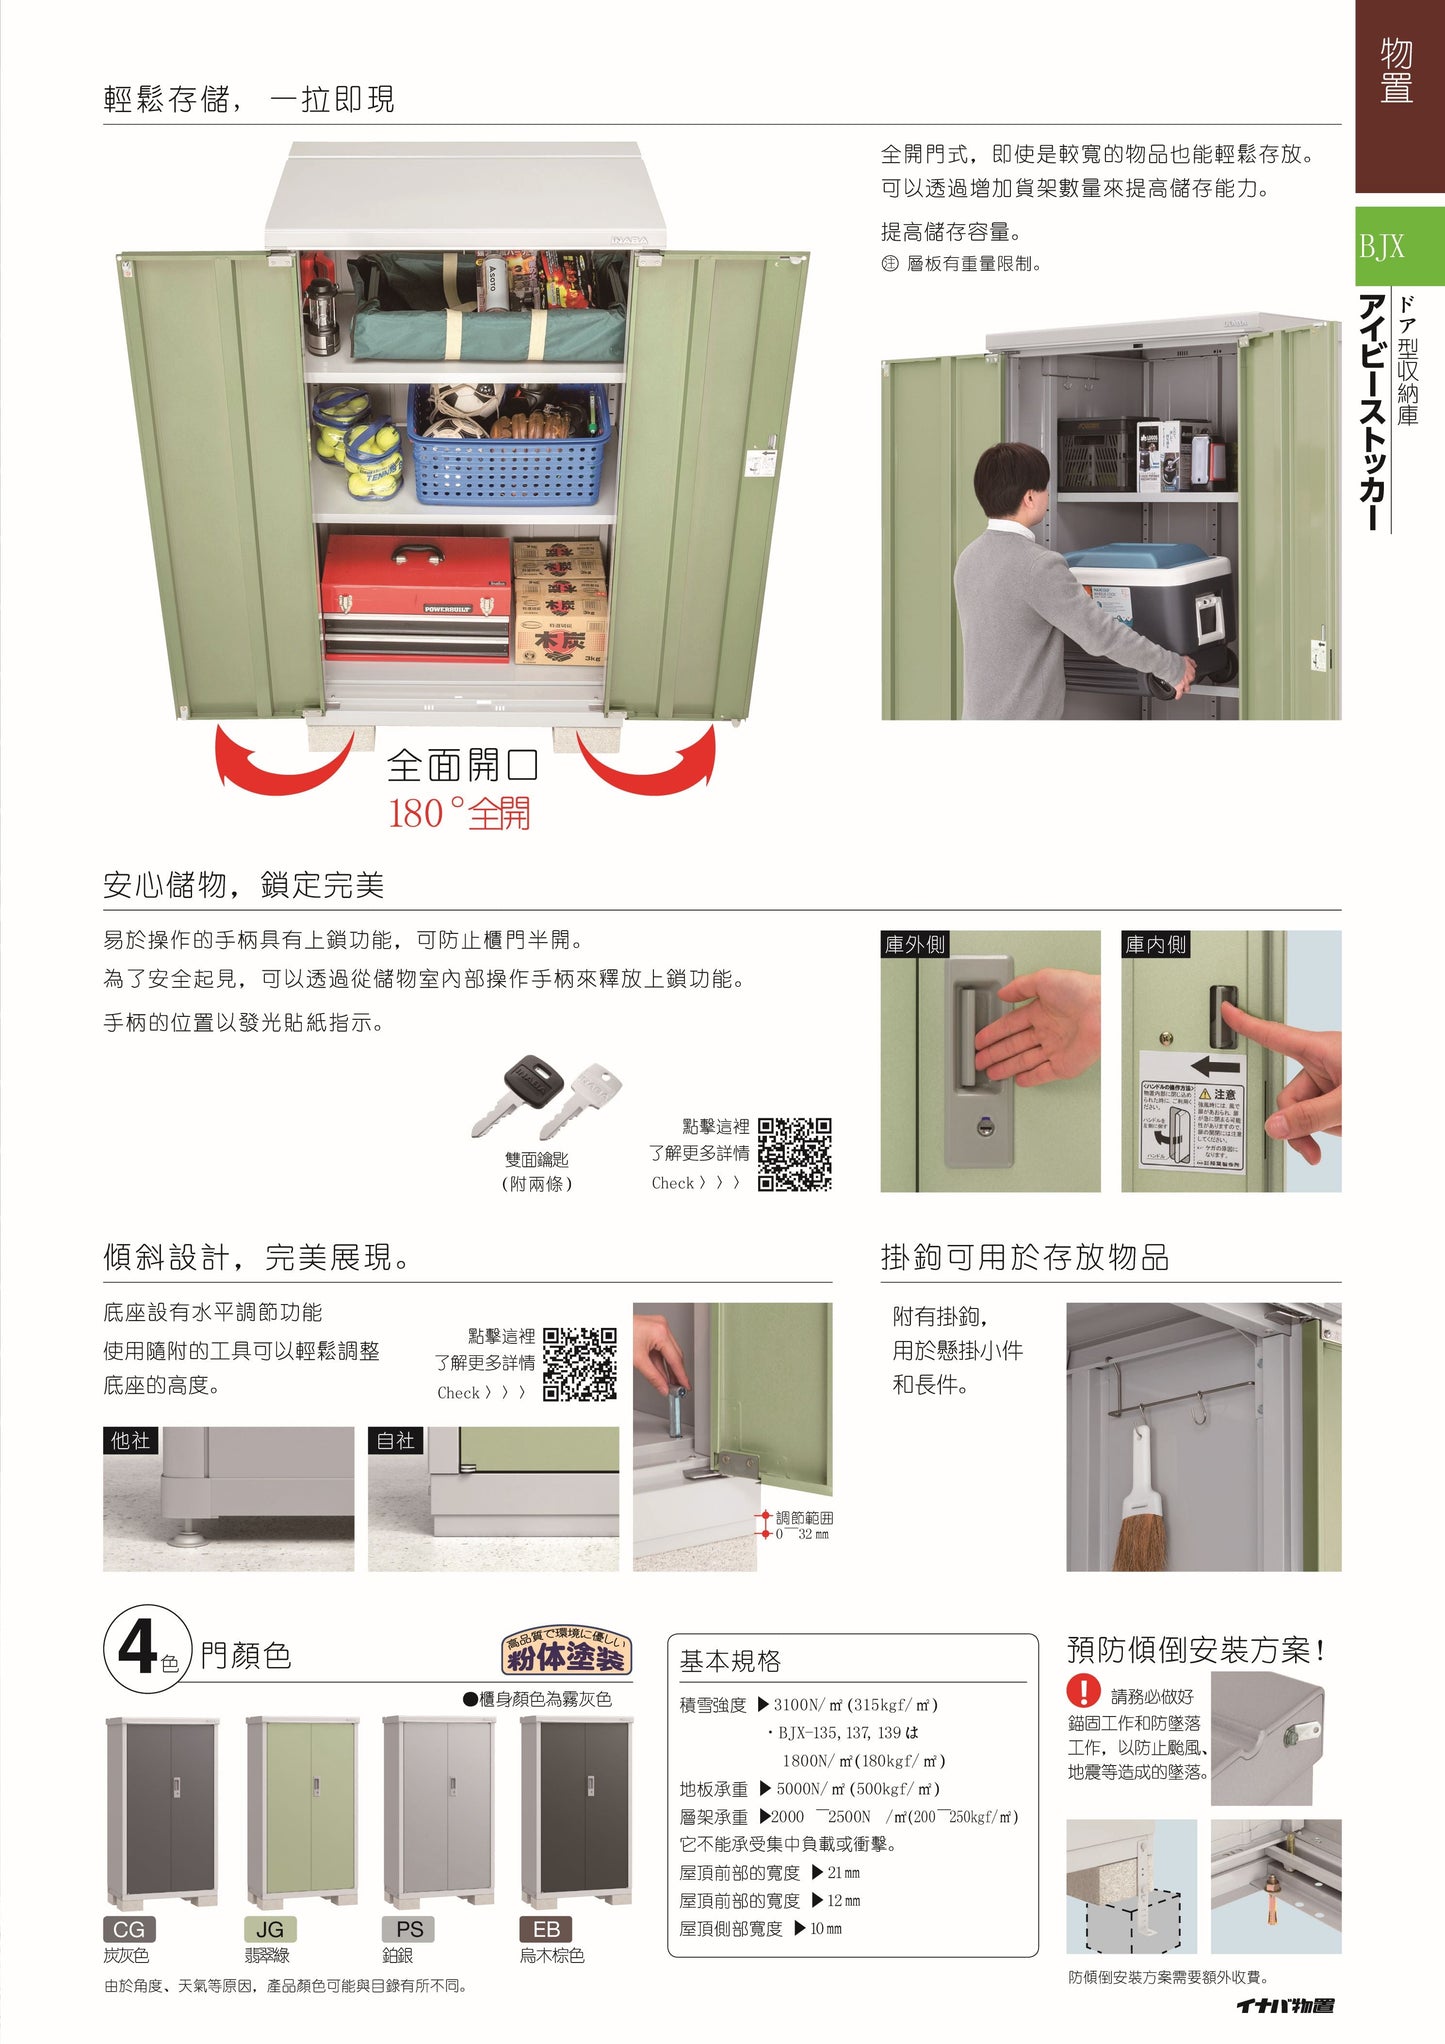 *Pre-order* Inaba Outdoor Storage BJX-115A (W1120XD548XH903mm)0.554m3